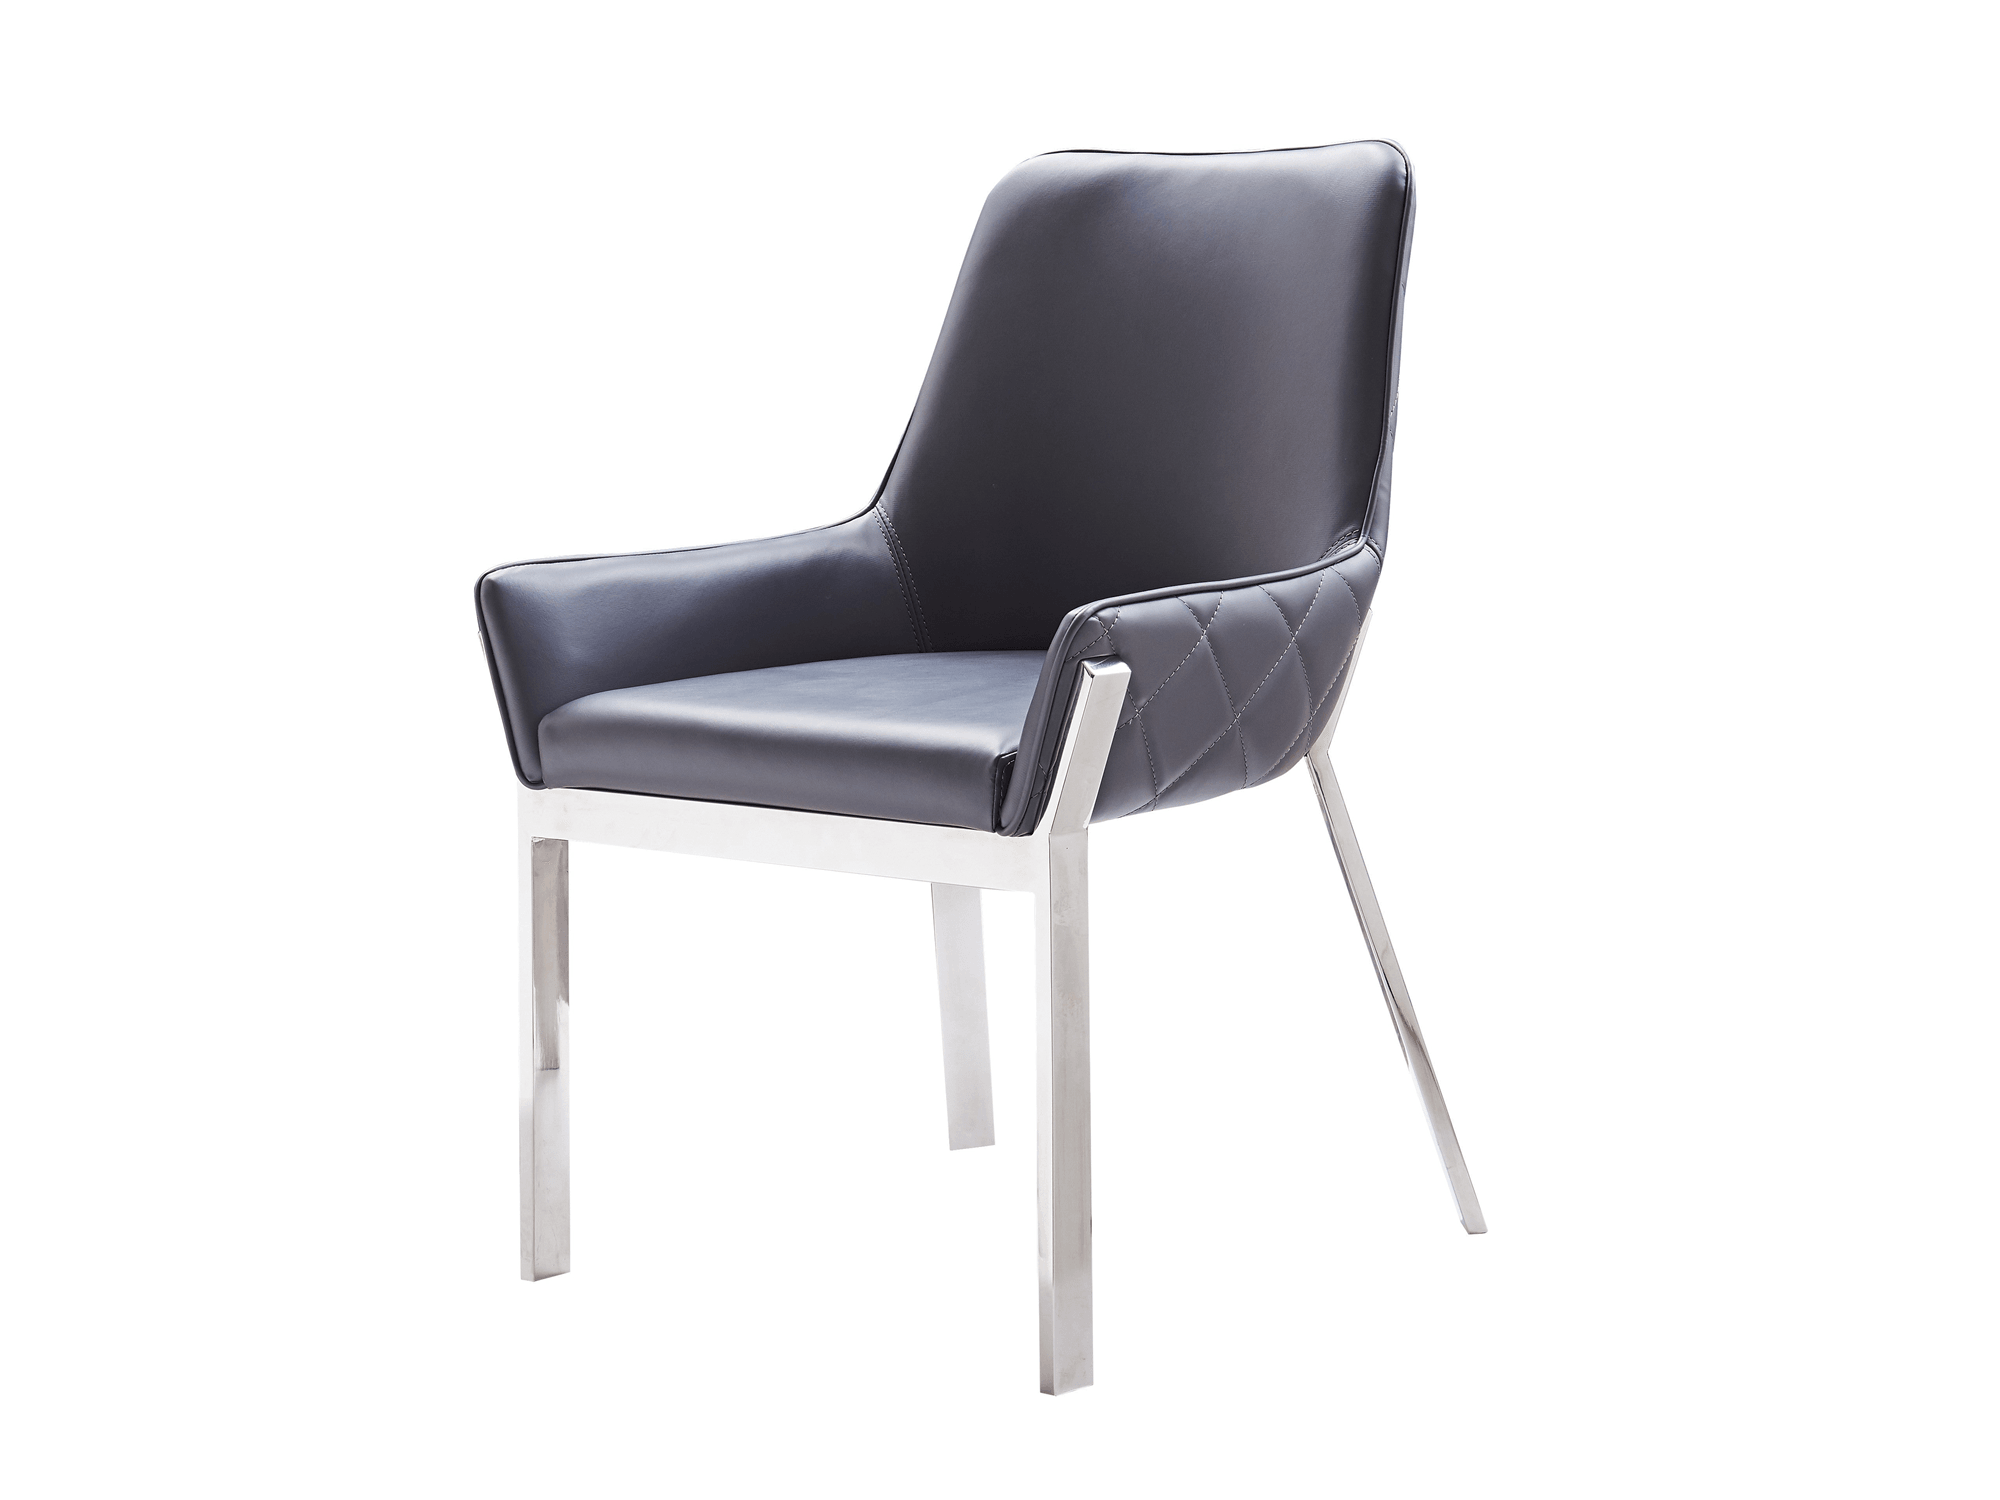 Premier Dining Chair in Grey - Euro Living Furniture